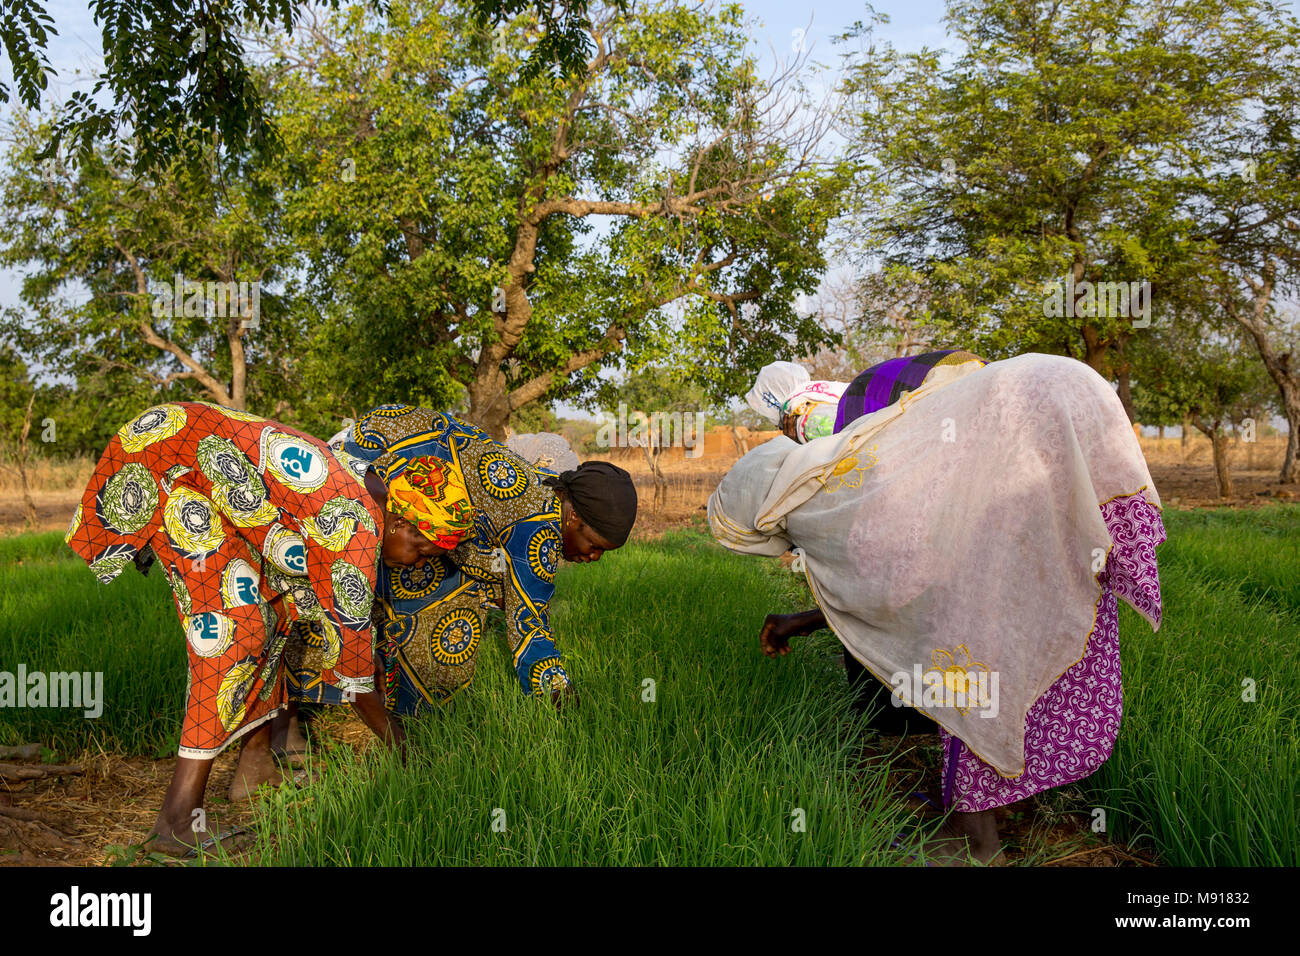 UBTEC NGO in a village near Ouahigouya, Burkina Faso. Members of a cooperative at work in a vegetable garden. Stock Photo